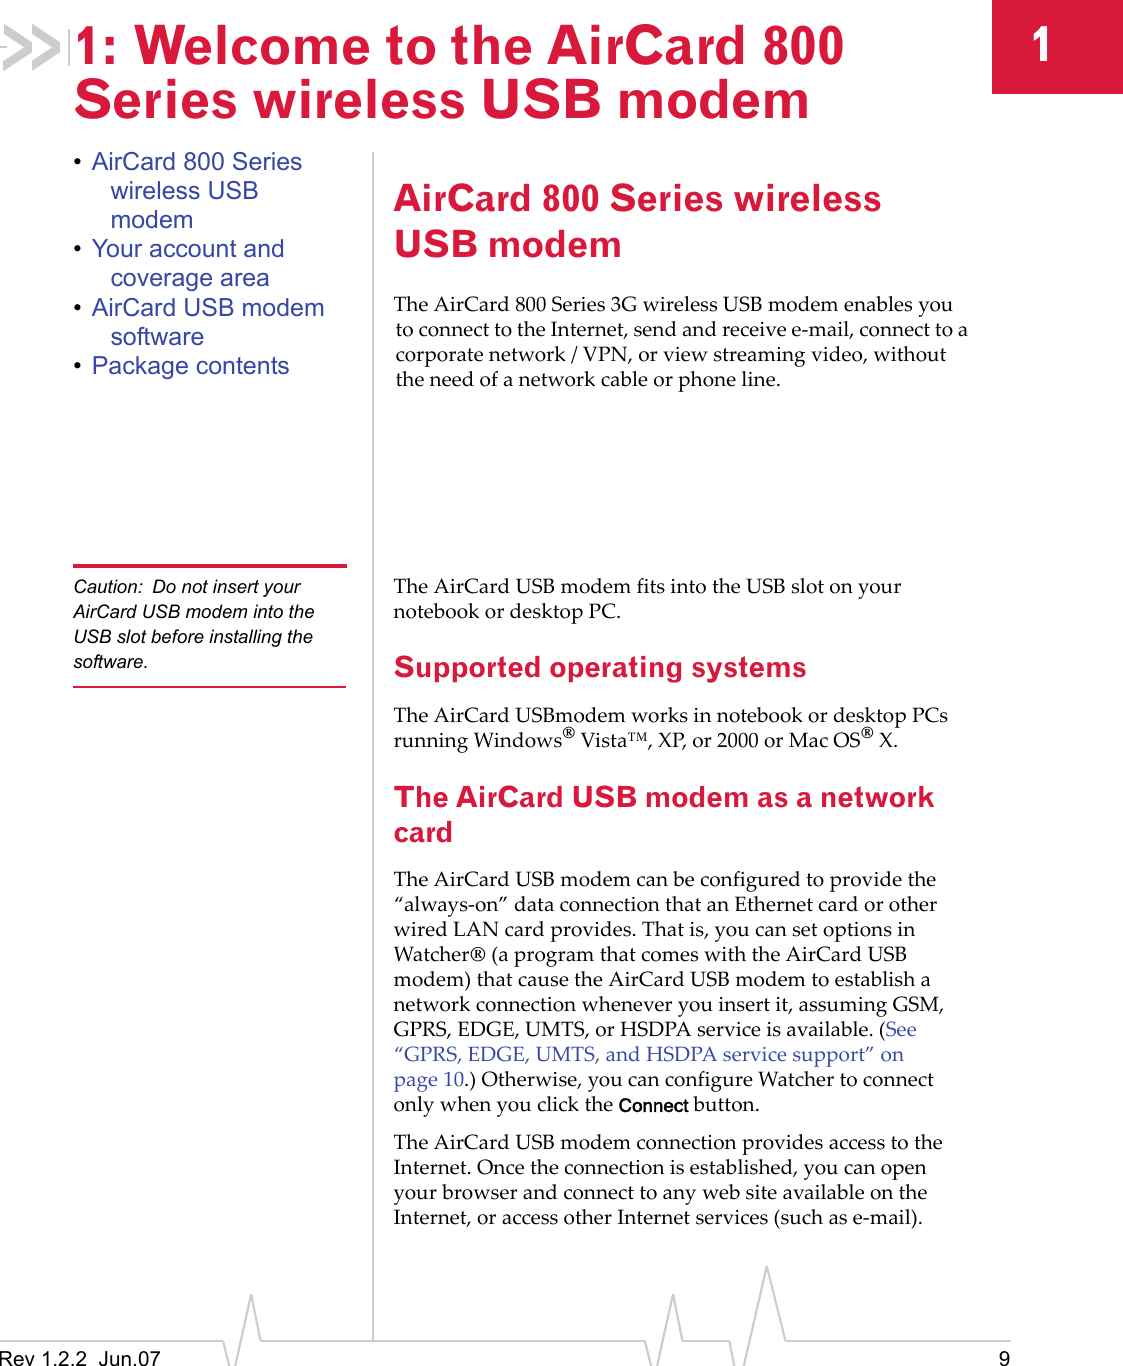 Rev 1.2.2  Jun.07 911: Welcome to the AirCard 800 Series wireless USB modem•AirCard 800 Series wireless USB modem•Your account and coverage area•AirCard USB modem software•Package contentsAirCard 800 Series wireless USB modemThe AirCard 800 Series 3G wireless USB modem enables you to connect to the Internet, send and receive e-mail, connect to a corporate network / VPN, or view streaming video, without the need of a network cable or phone line.Caution: Do not insert your AirCard USB modem into the USB slot before installing the software.The AirCard USB modem fits into the USB slot on your notebook or desktop PC.Supported operating systemsThe AirCard USBmodem works in notebook or desktop PCs running Windows® Vista™, XP, or 2000 or Mac OS® X.The AirCard USB modem as a network cardThe AirCard USB modem can be configured to provide the “always-on” data connection that an Ethernet card or other wired LAN card provides. That is, you can set options in Watcher® (a program that comes with the AirCard USB modem) that cause the AirCard USB modem to establish a network connection whenever you insert it, assuming GSM, GPRS, EDGE, UMTS, or HSDPA service is available. (See “GPRS, EDGE, UMTS, and HSDPA service support” on page 10.) Otherwise, you can configure Watcher to connect only when you click the Connect button.The AirCard USB modem connection provides access to the Internet. Once the connection is established, you can open your browser and connect to any web site available on the Internet, or access other Internet services (such as e-mail). 